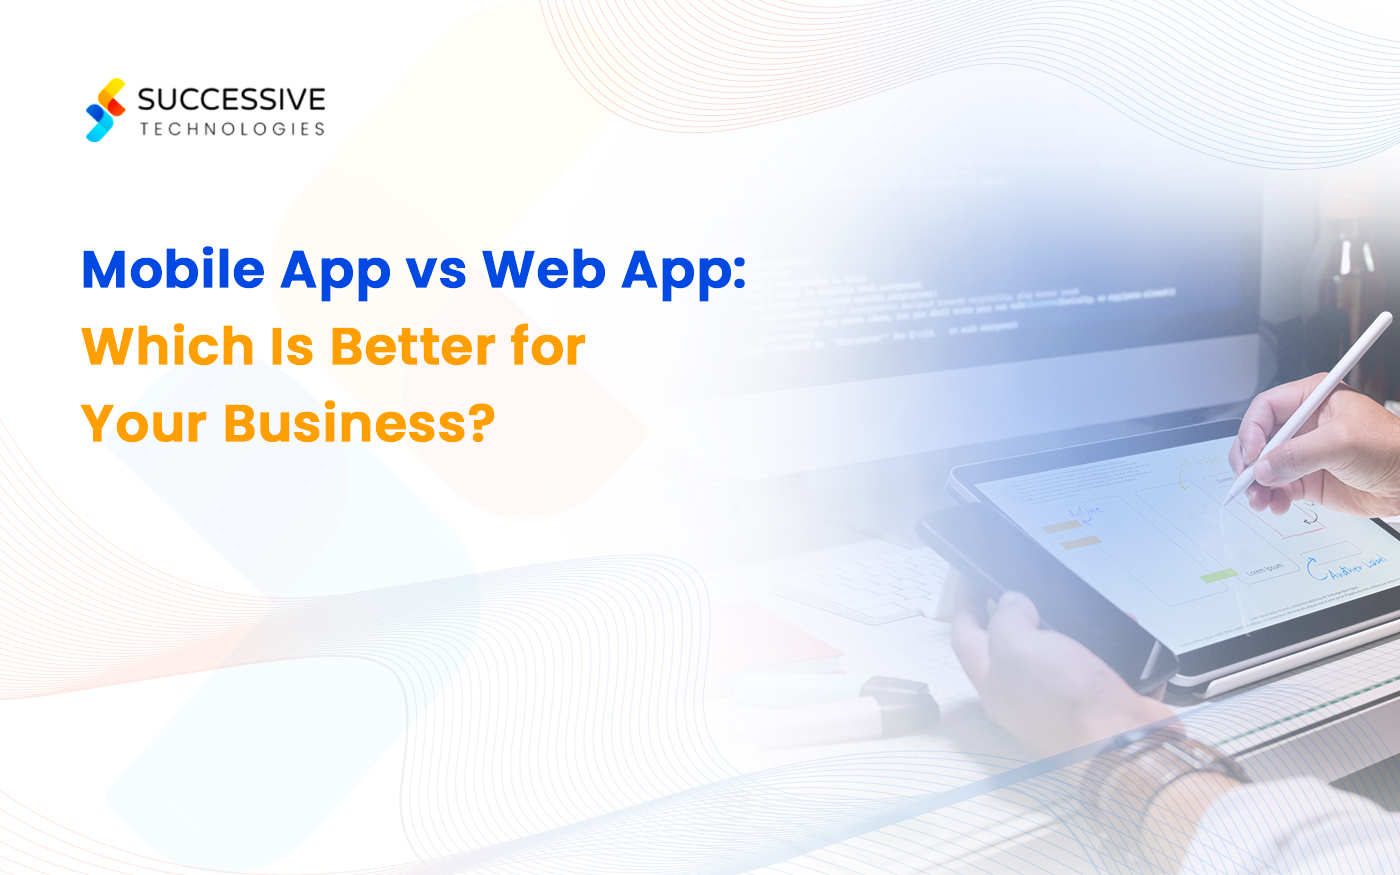 Mobile App vs Web App: Which Is Better for Your Business?